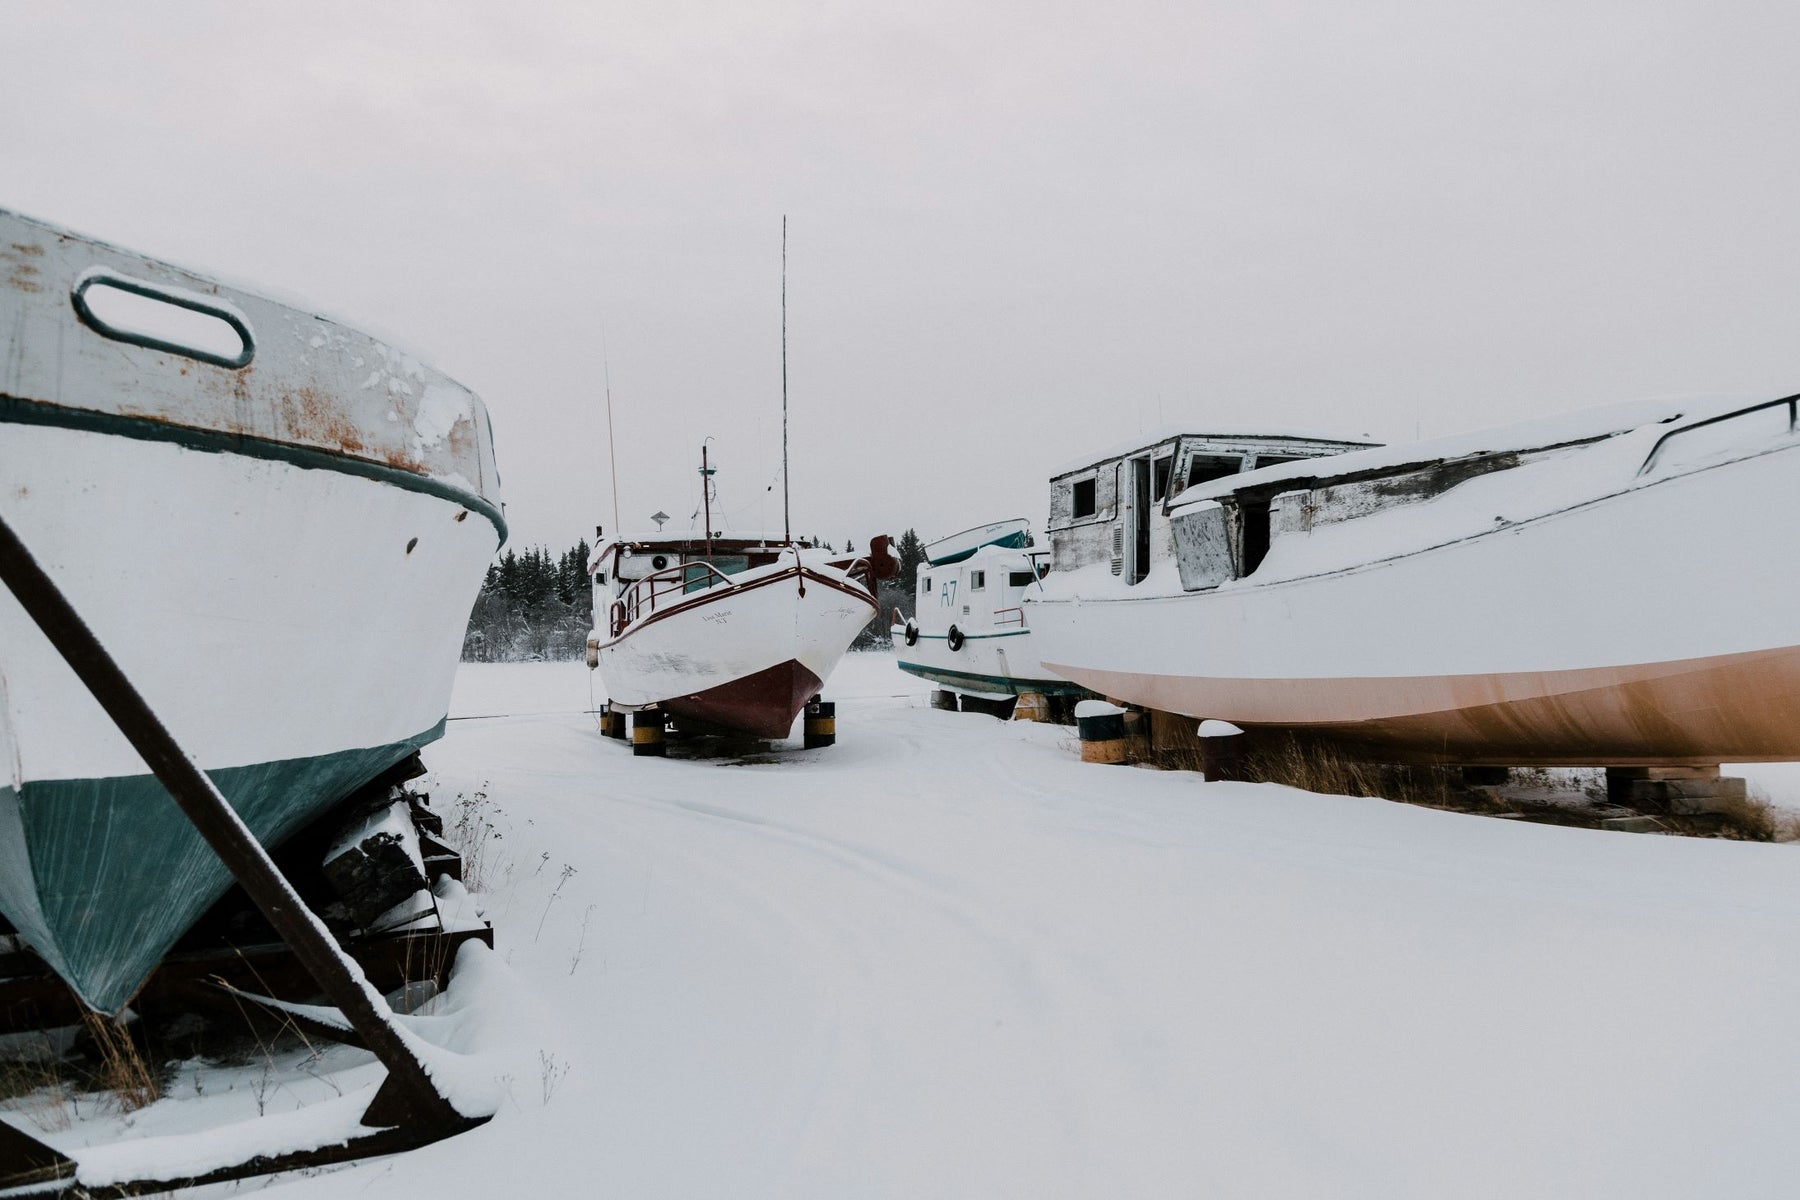 Winterizing Your Boat: The 8 Most Important Things To Know